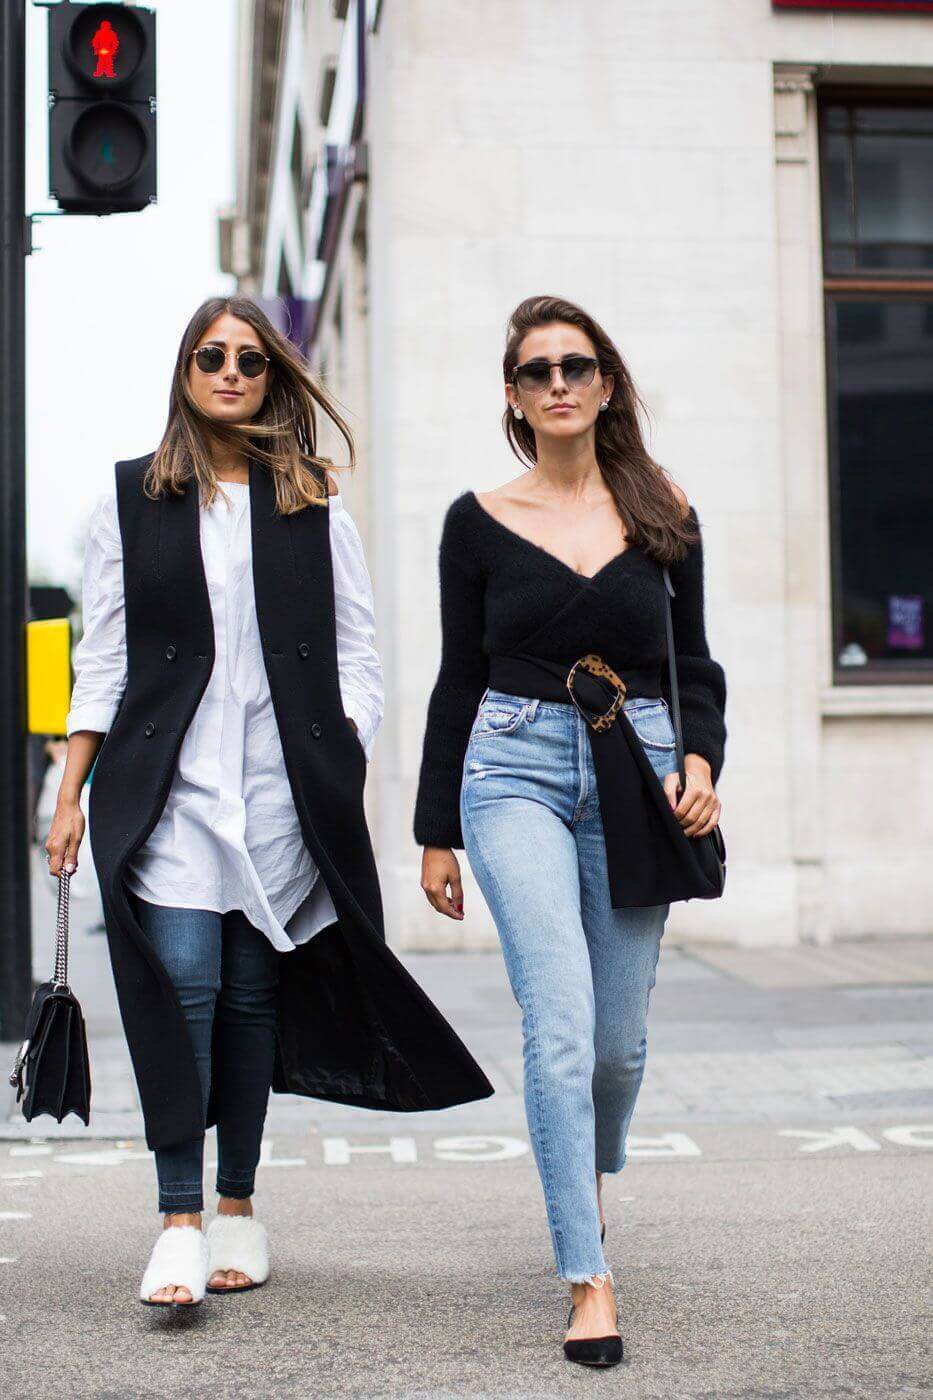 What’s Your Extension? Long Sleeves Trail Down the Runway and Street